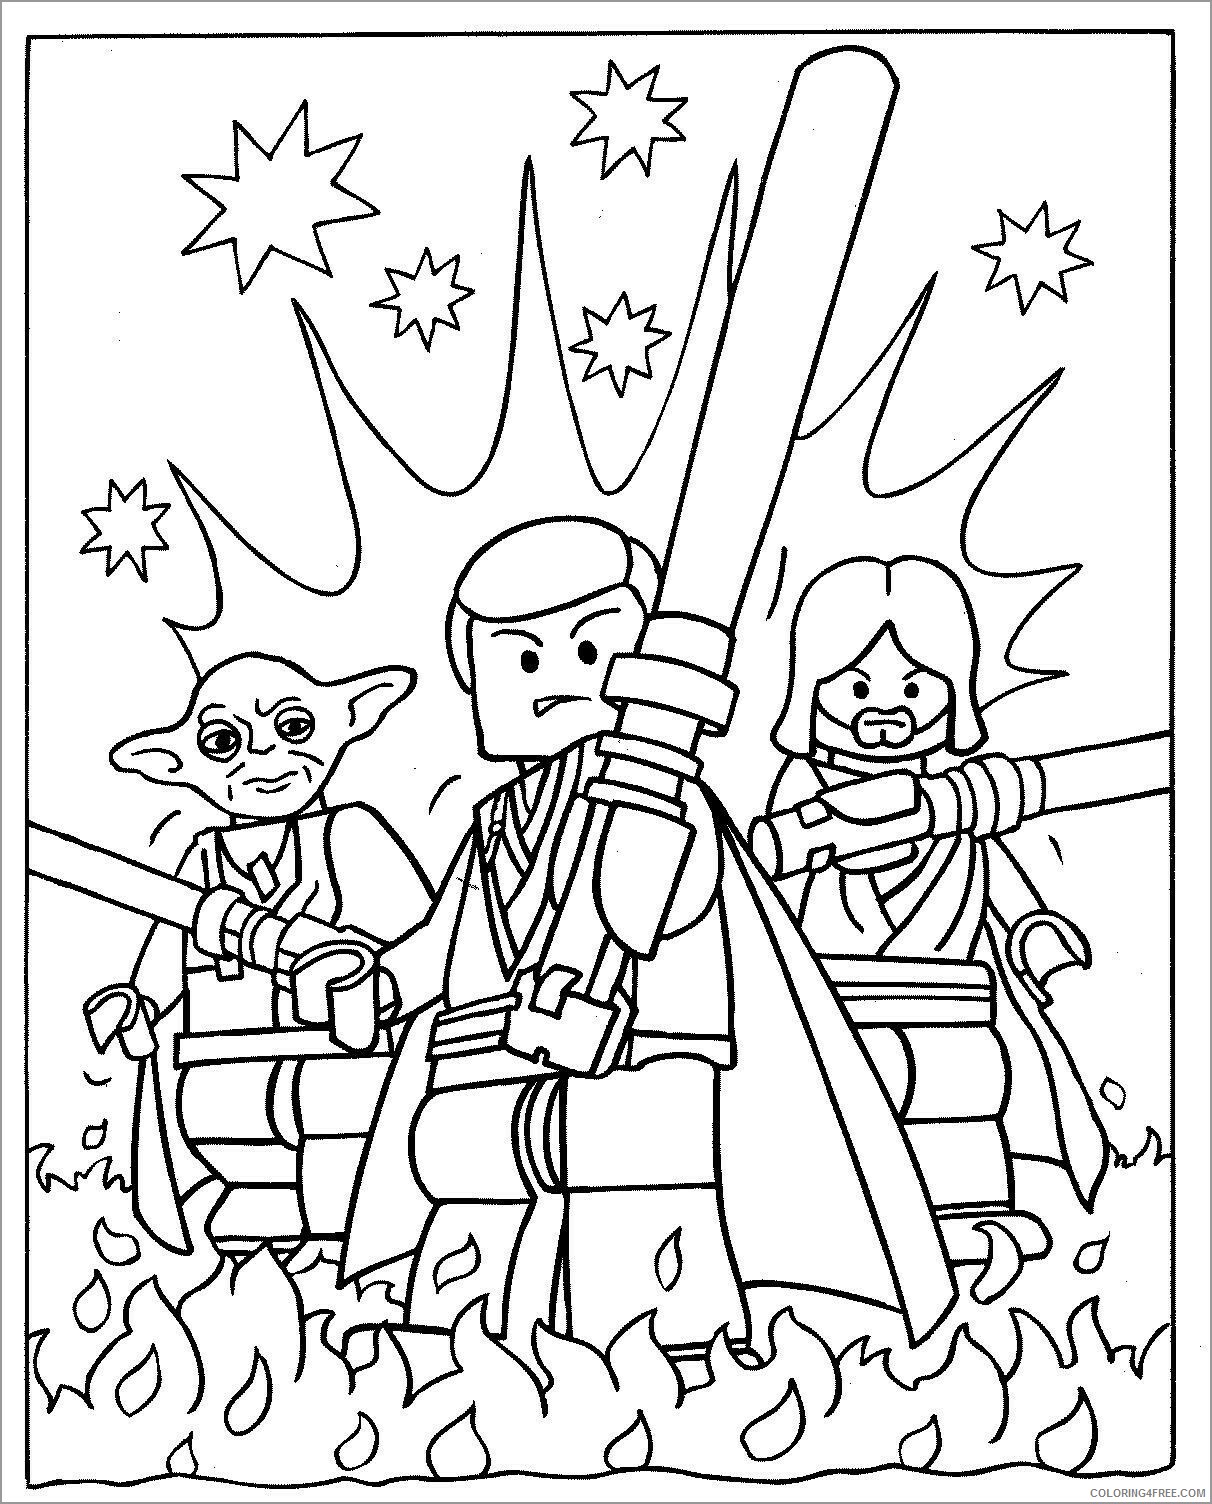 Star Wars Coloring Pages TV Film free star wars lego Printable 2020 07790 Coloring4free